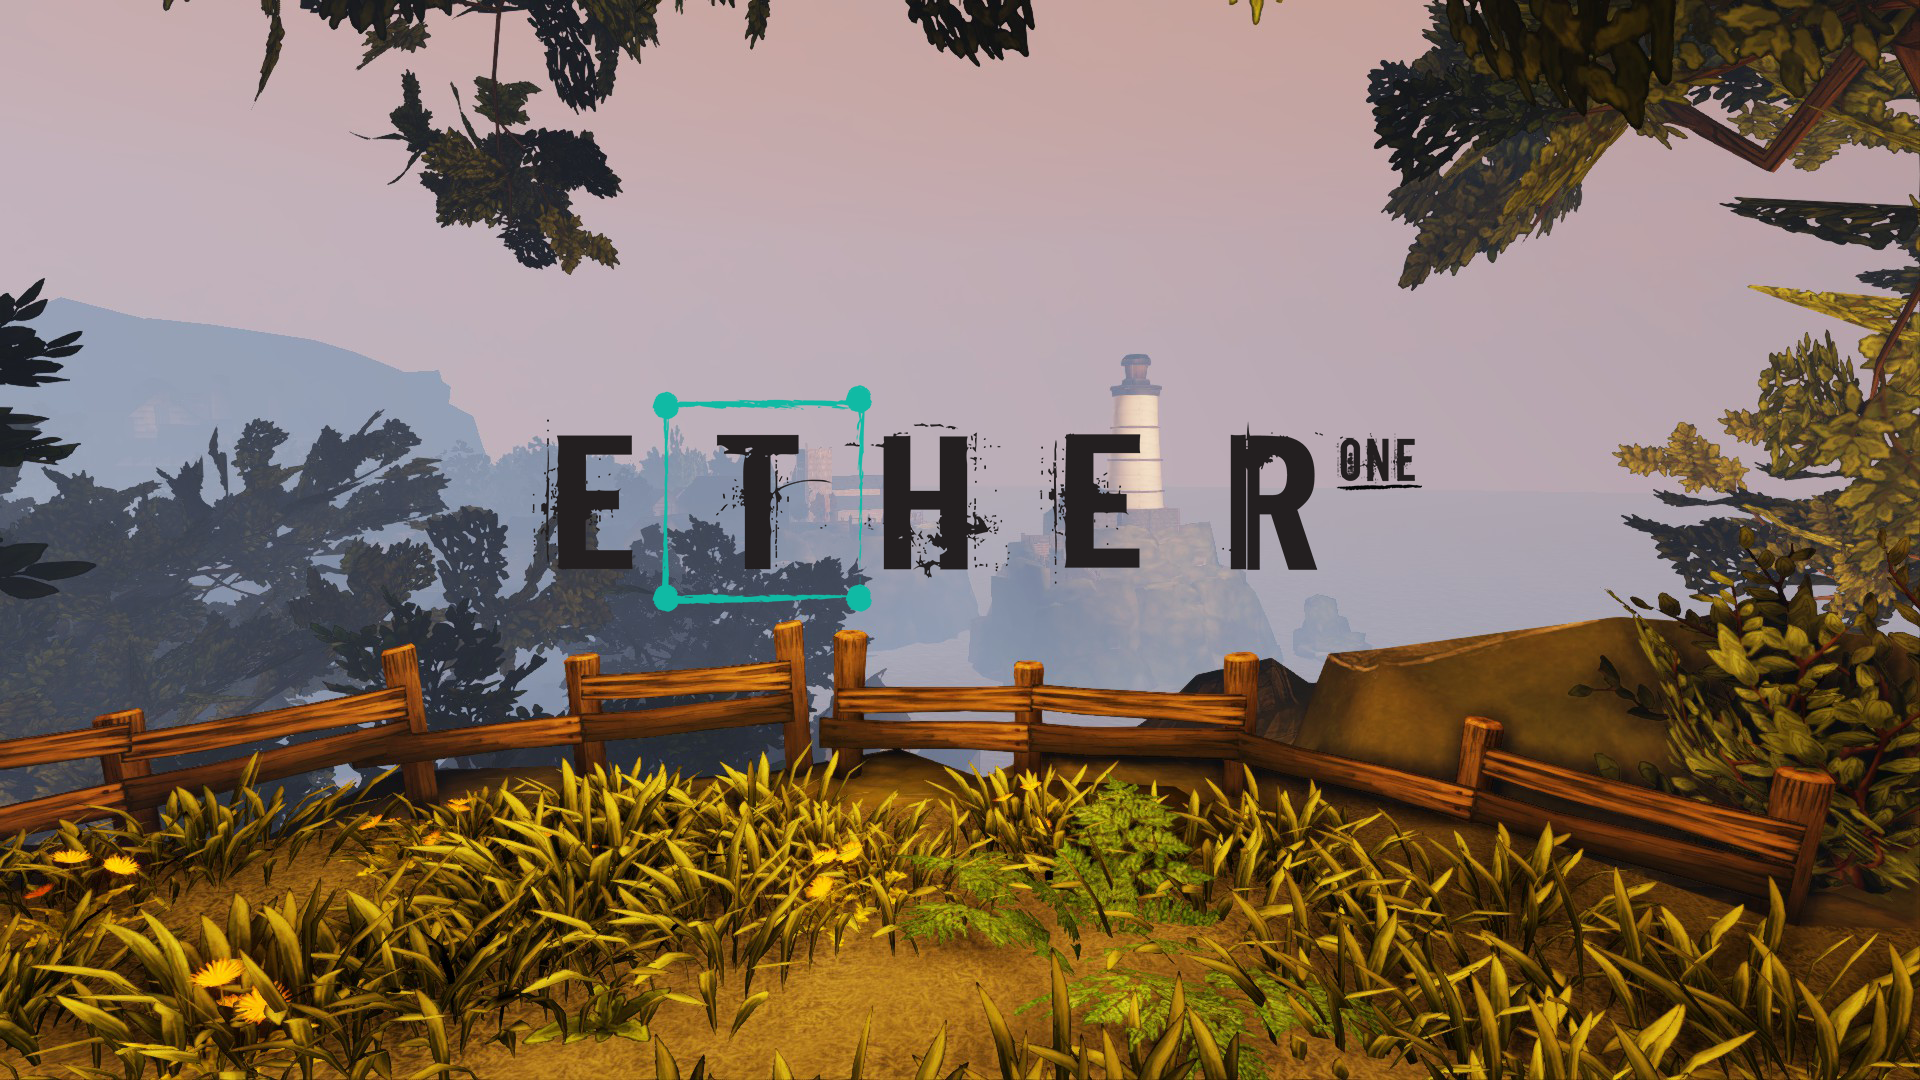 Ether One review: No time to lose your mind